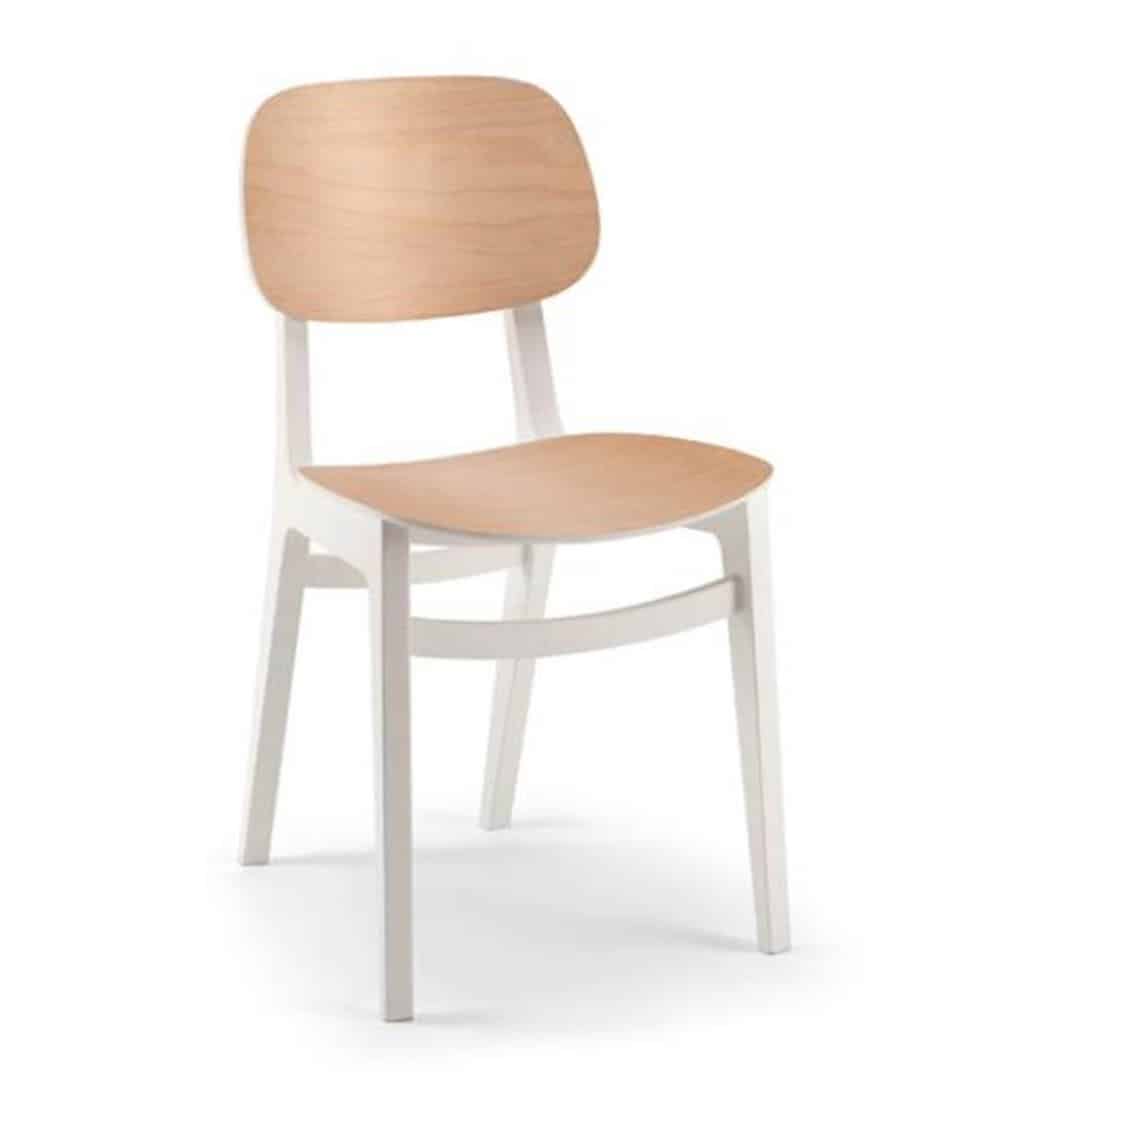 Lottie Side Chair DeFrae Contract Furniture Wooden Restaurant Chair X Kitti Xedra two tone